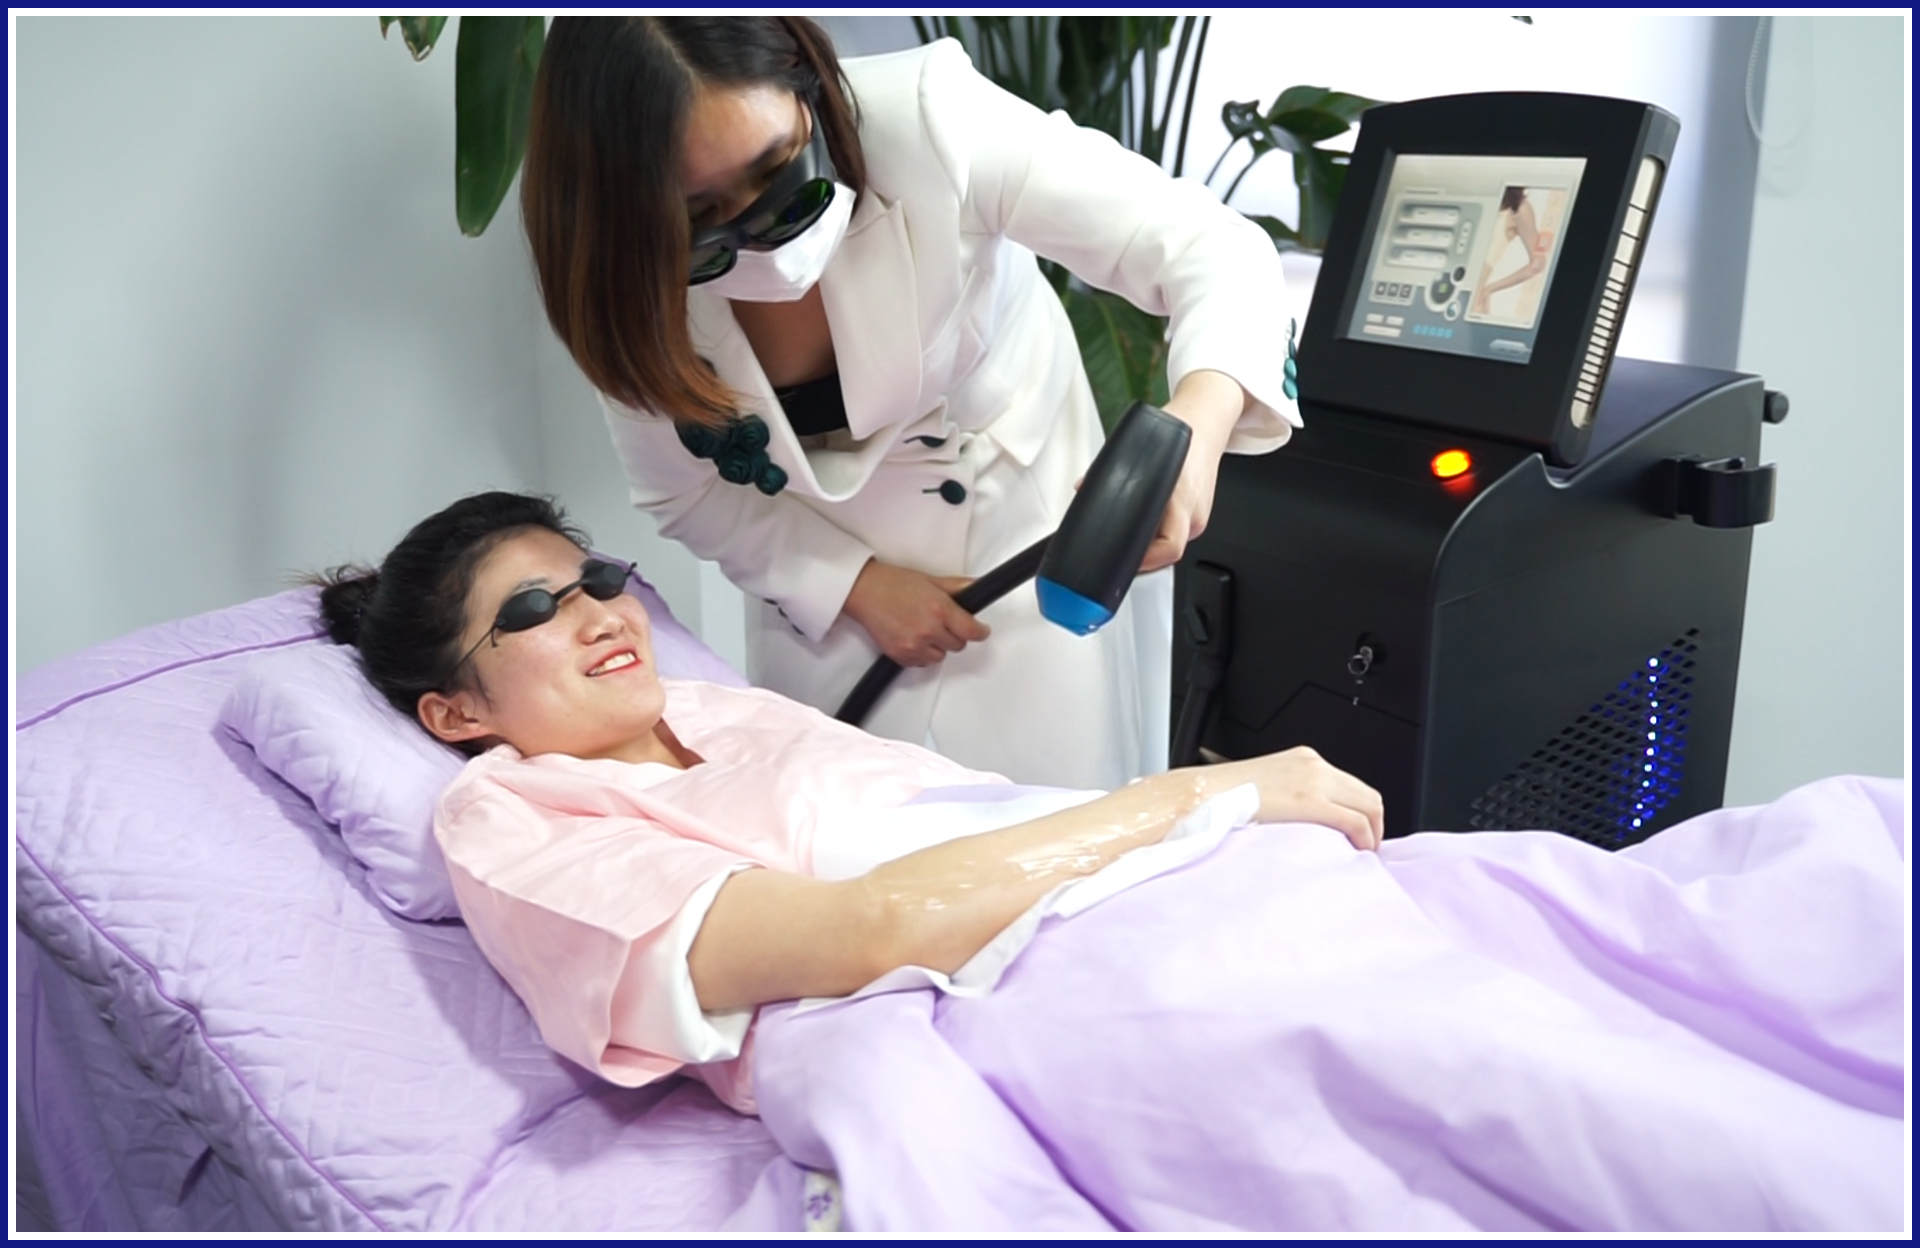 SP808 laser hair removal commercial machine look familiar to you?